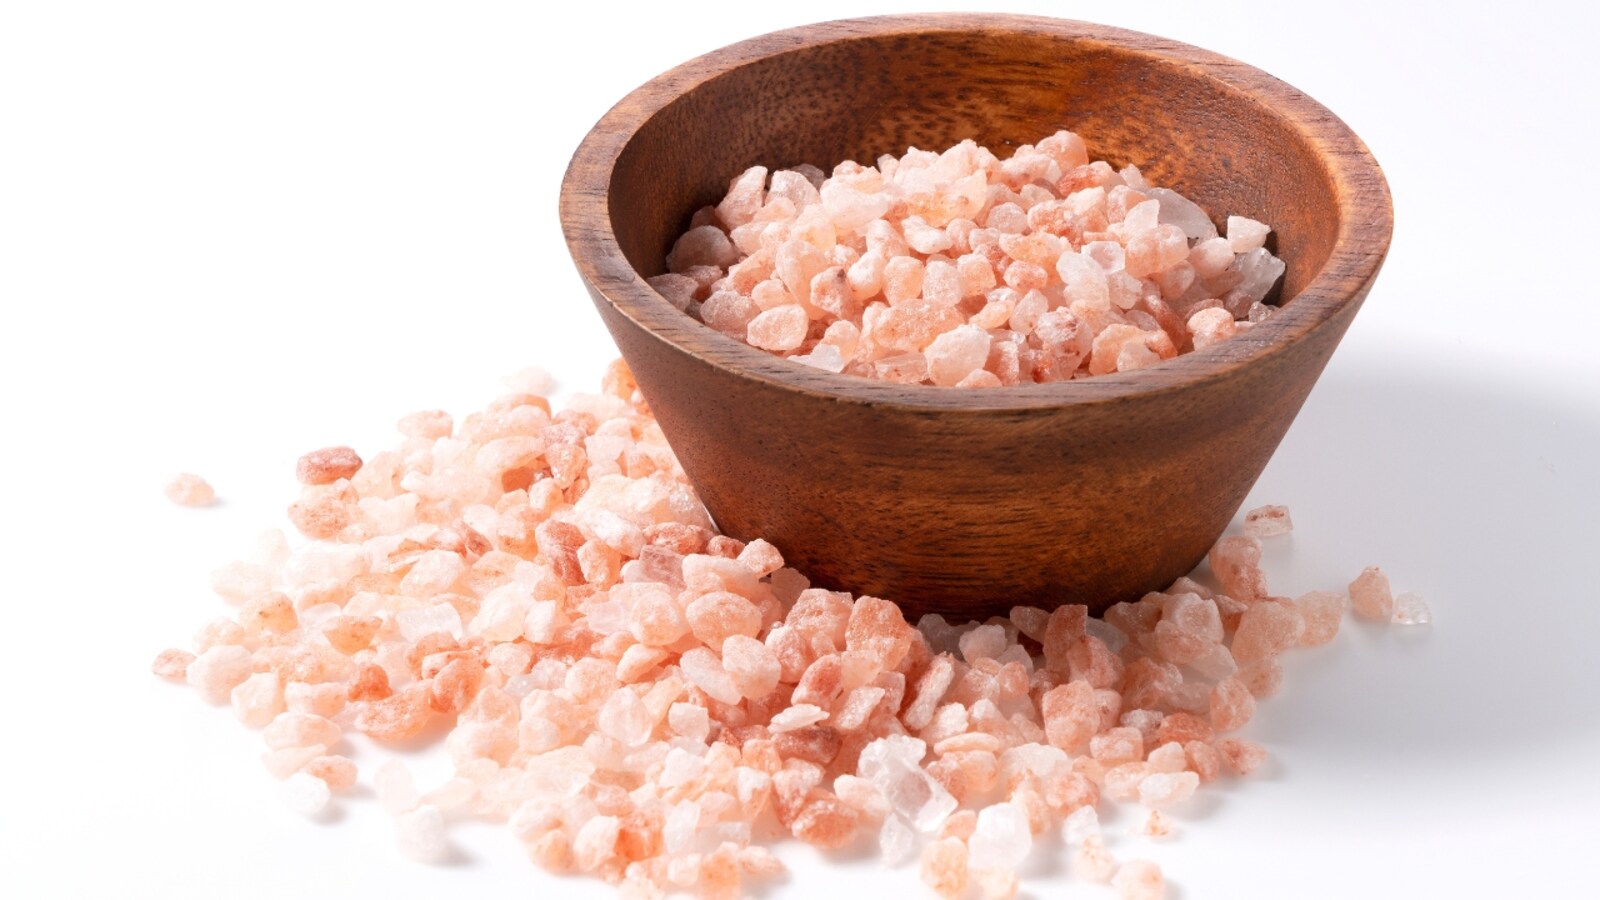 10 health benefits of Himalayan salt water: Here's why you should start  your day with this elixir